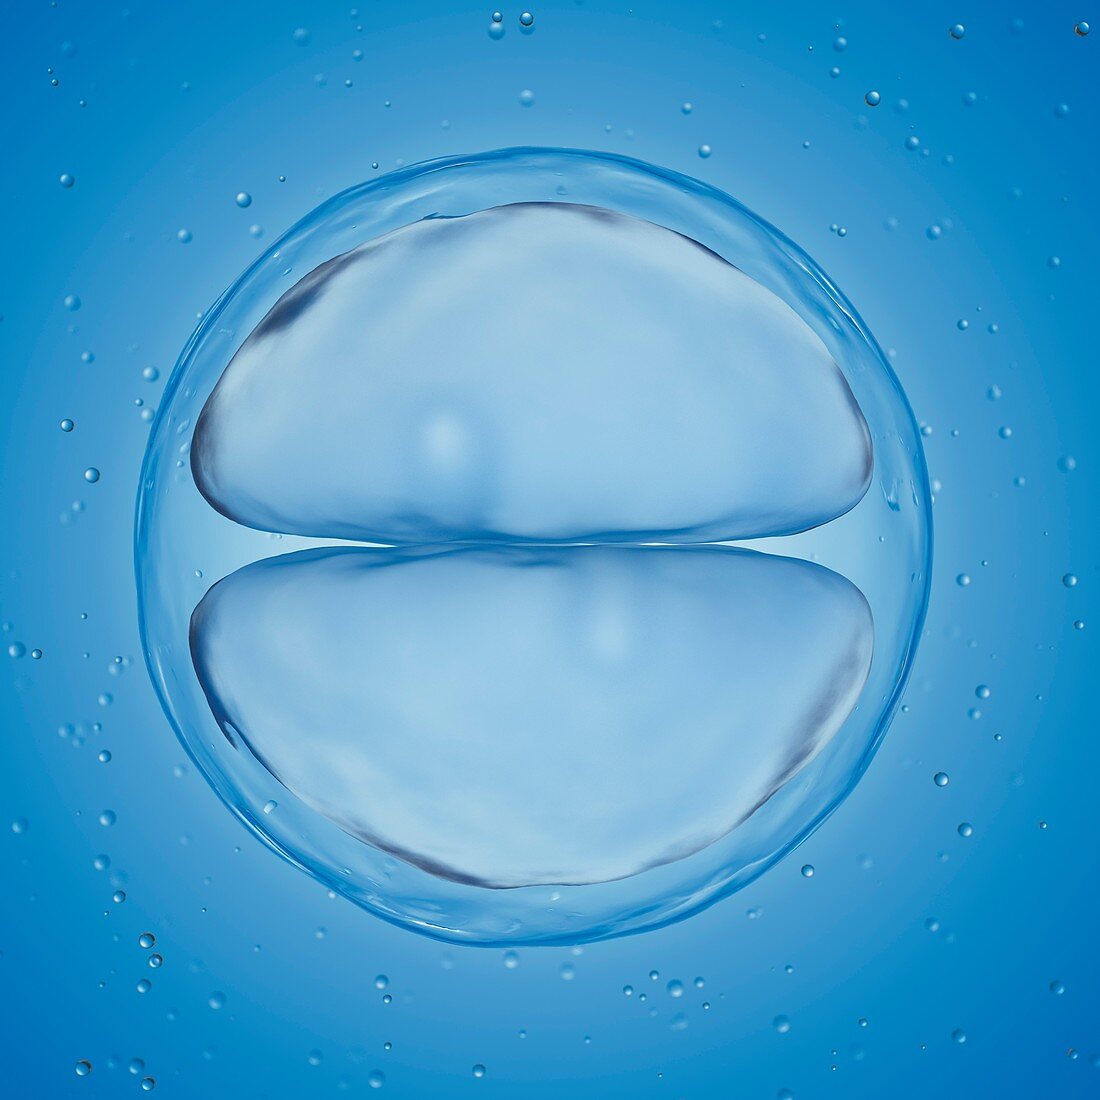 Illustration of a 2 cell stage egg